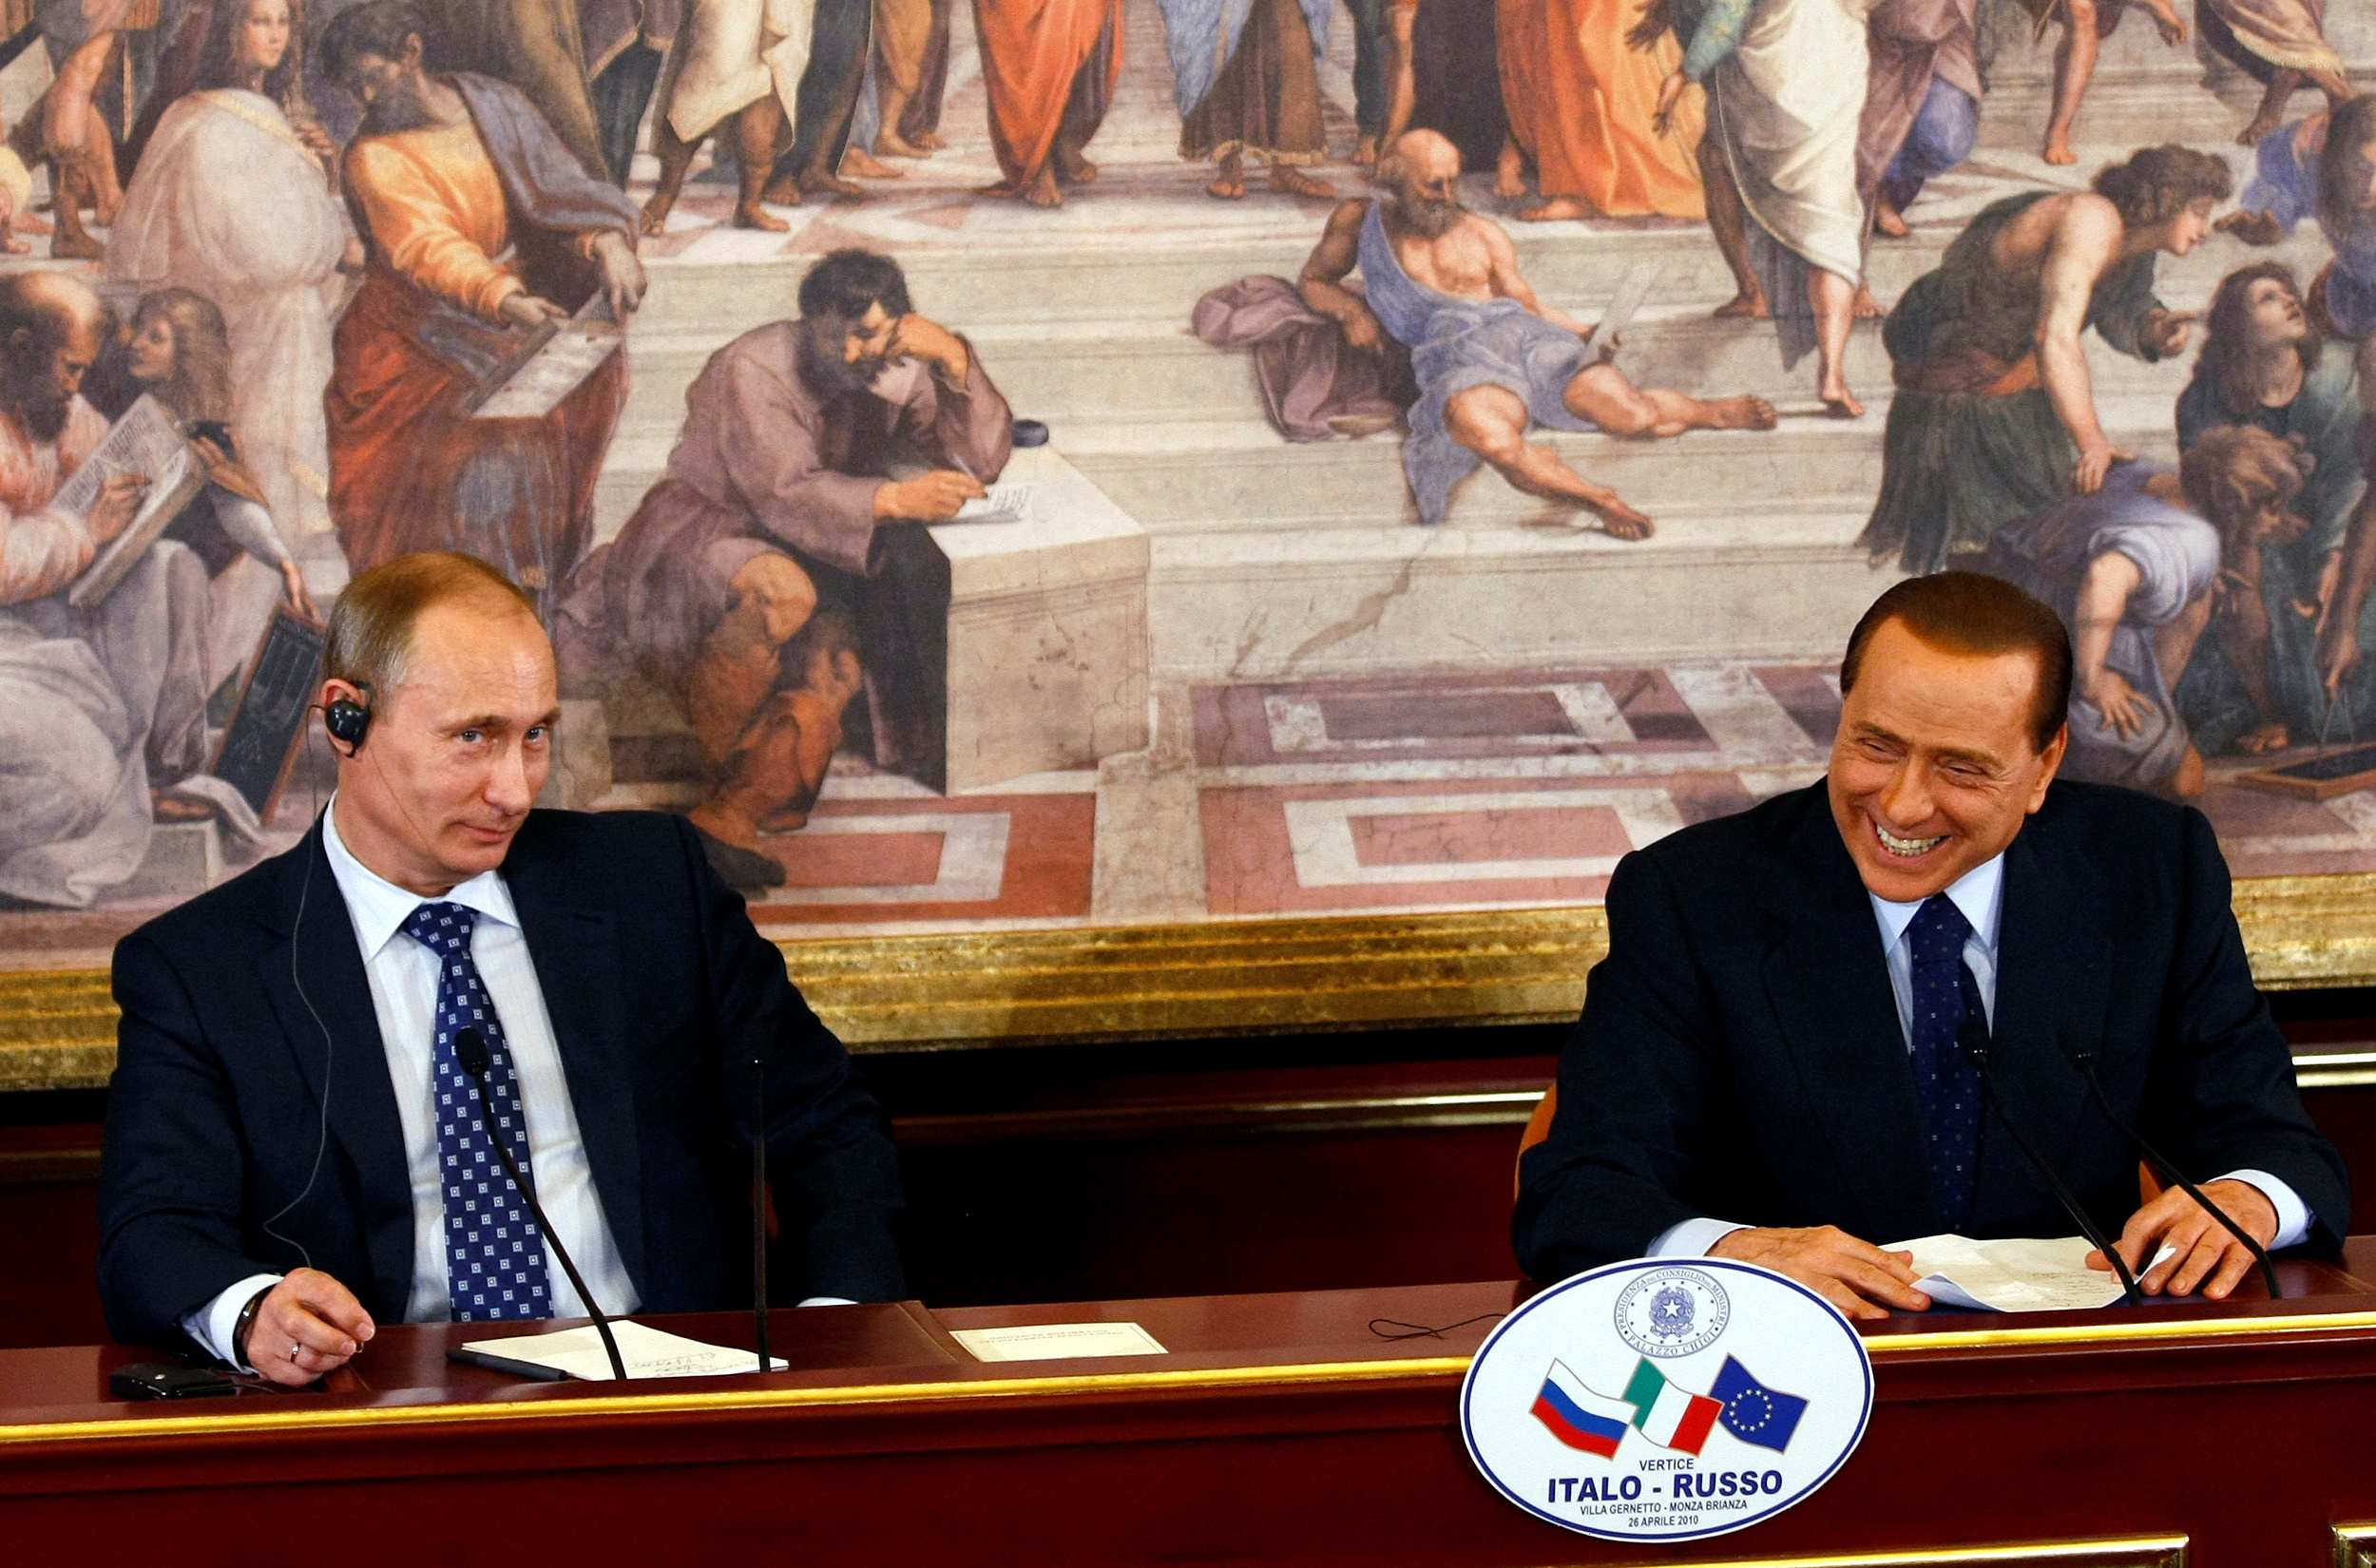 Former Italian Prime Minister Silvio Berlusconi smiles during a news conference with Russian President Vladimir Putin at the summit on April 26, 2010 at Villa Gerneto in Gerno, near Milan.  REUTERS / Alessandro Garofalo